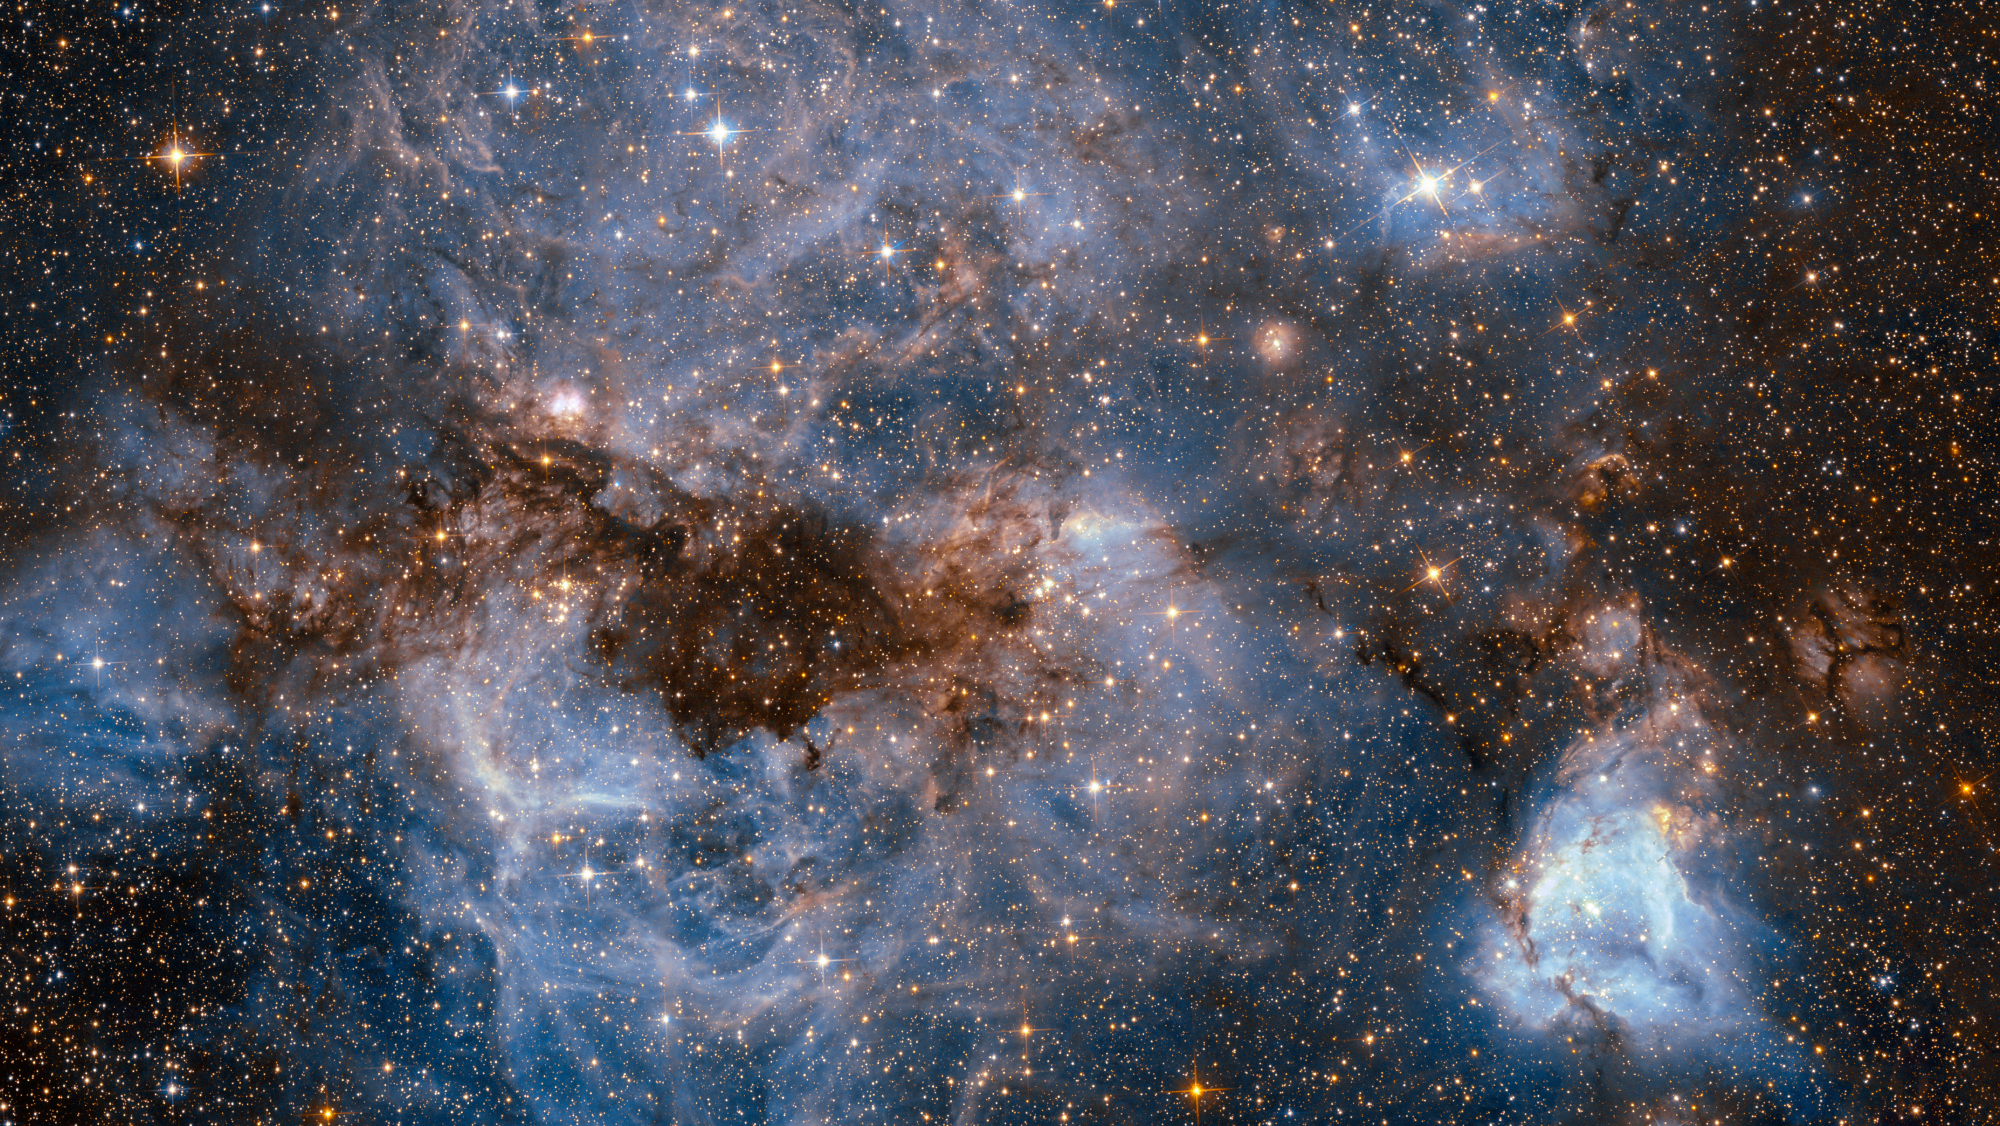 This shot from the NASA/ESA Hubble Space Telescope shows a maelstrom of glowing gas and dark dust within one of the Milky Way’s satellite galaxies, the Large Magellanic Cloud (LMC).